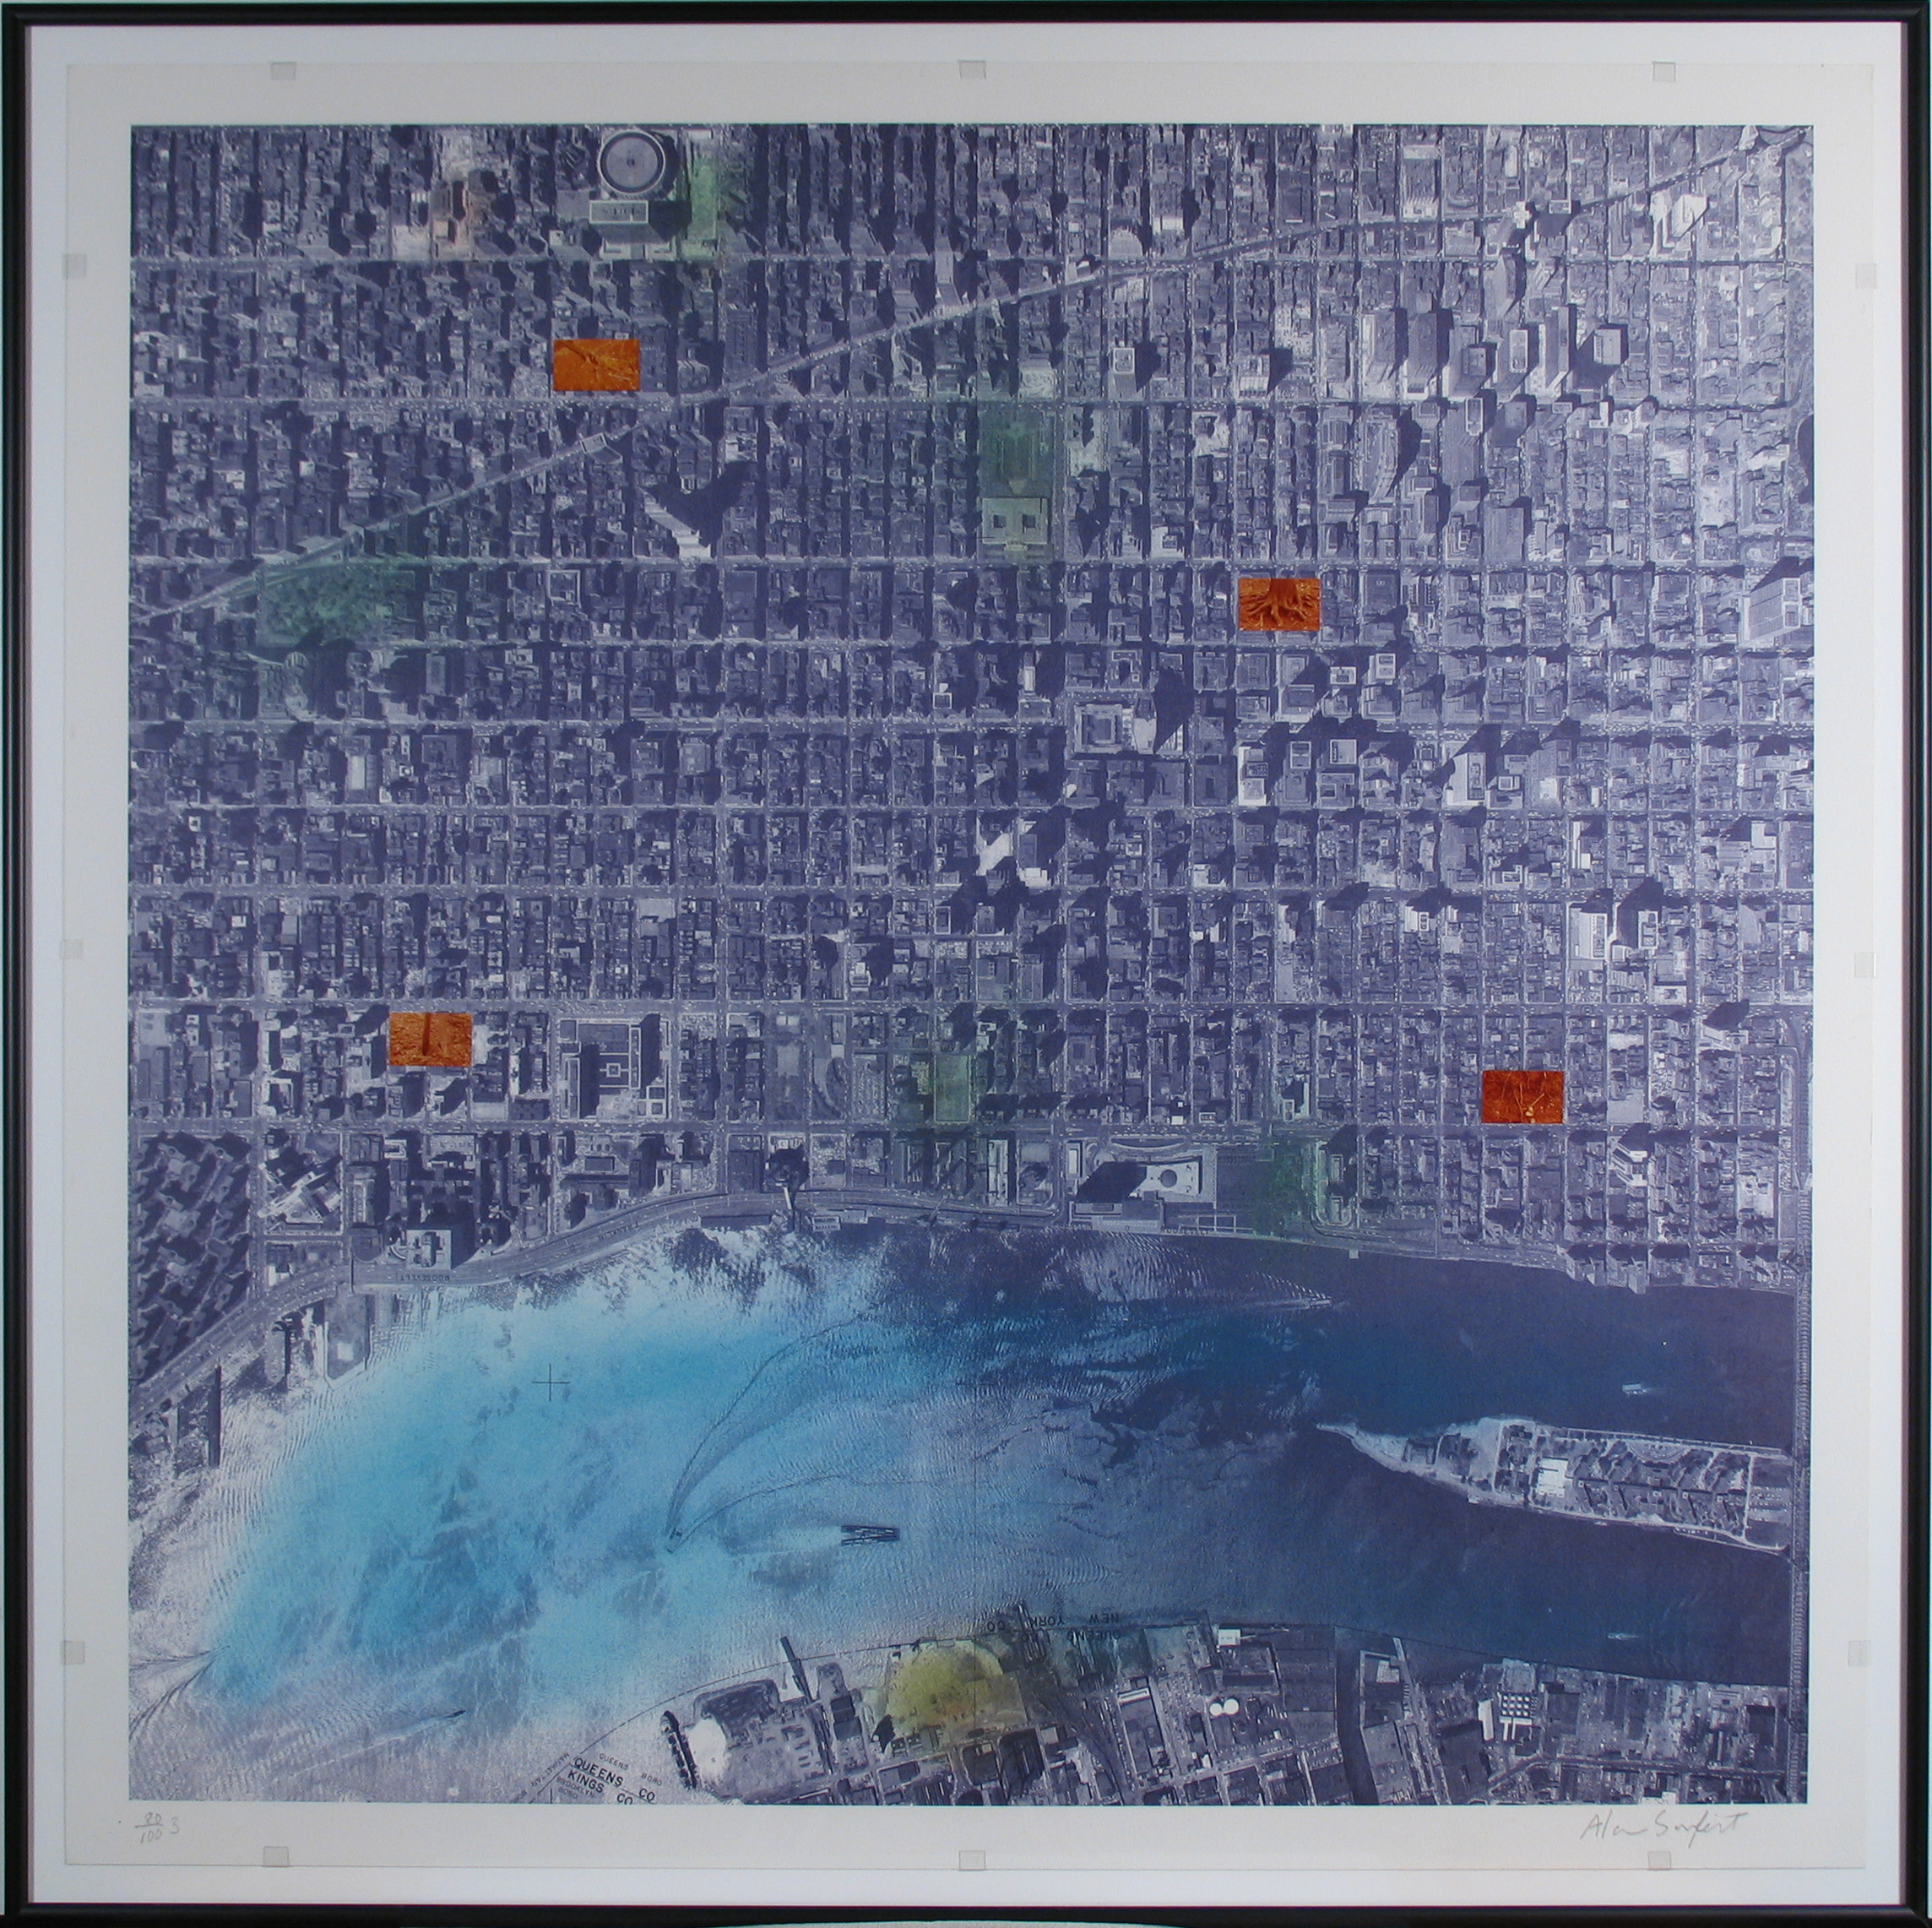 Alan Sonfist, "Views of New York City: Ancient and Contemporary." Serigraph, 26.25 x 26.25 in. Gift of Kimberly Cramer